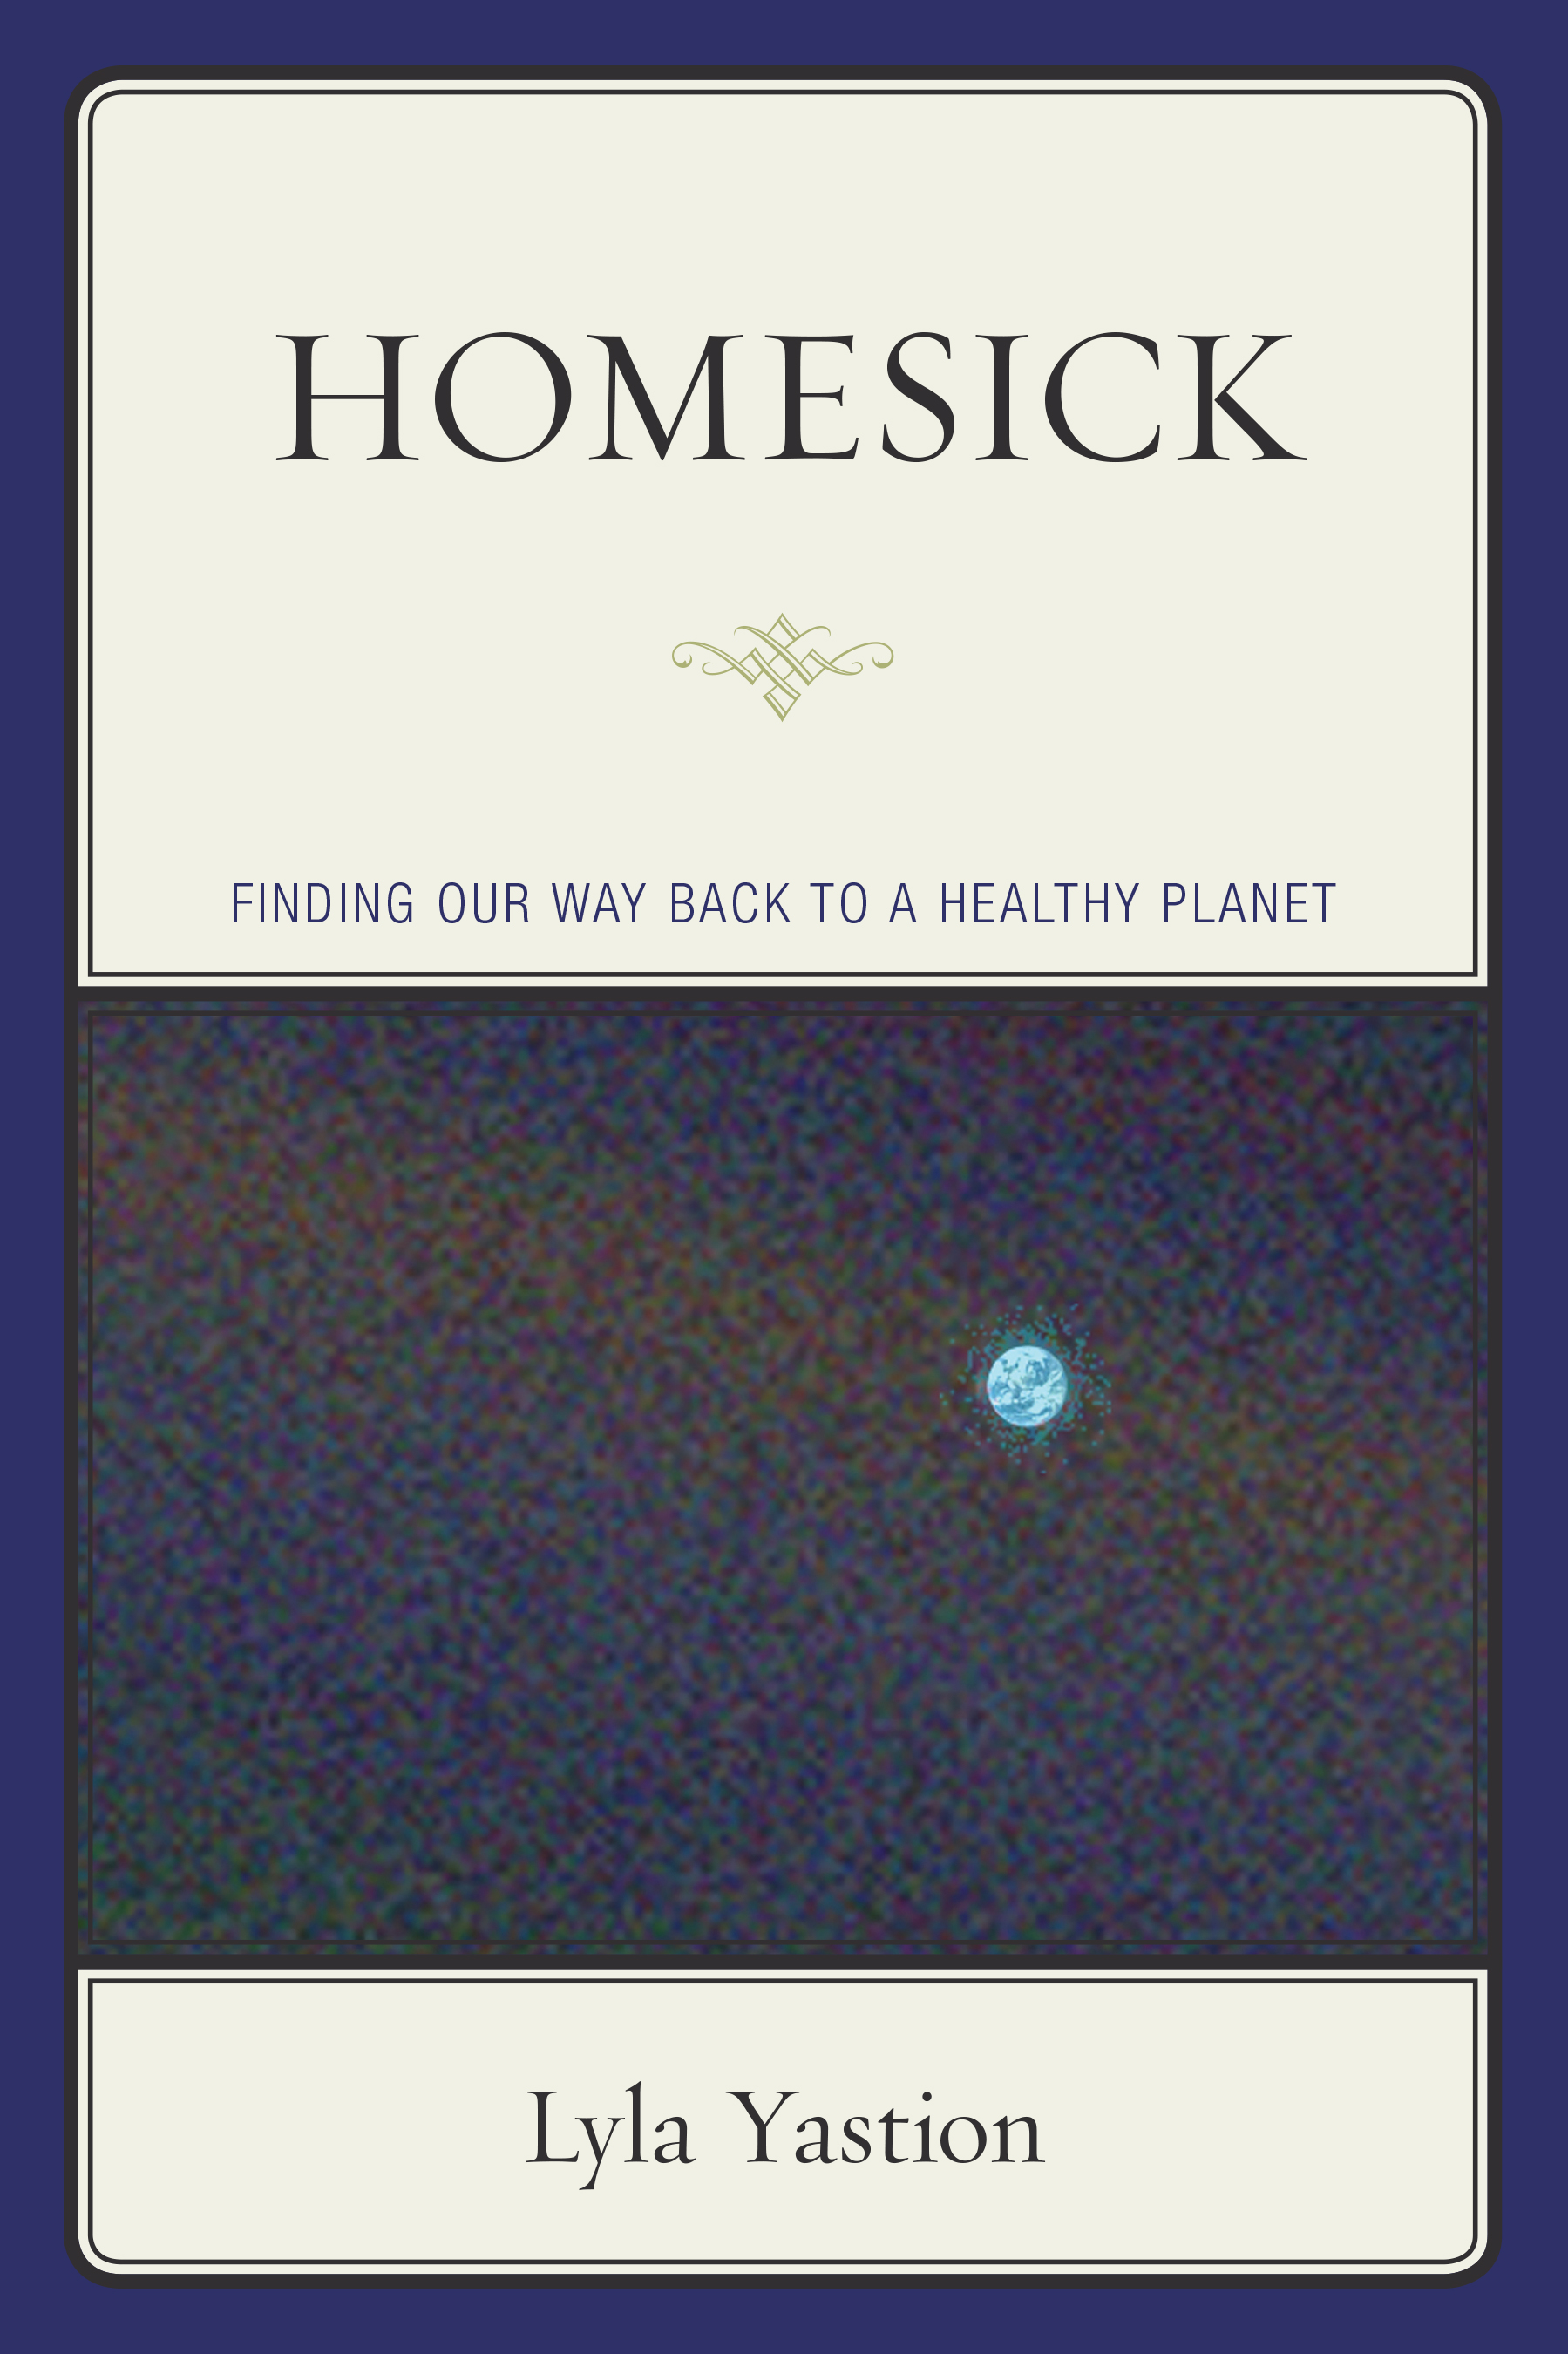 Homesick: Finding Our Way Back to a Healthy Planet